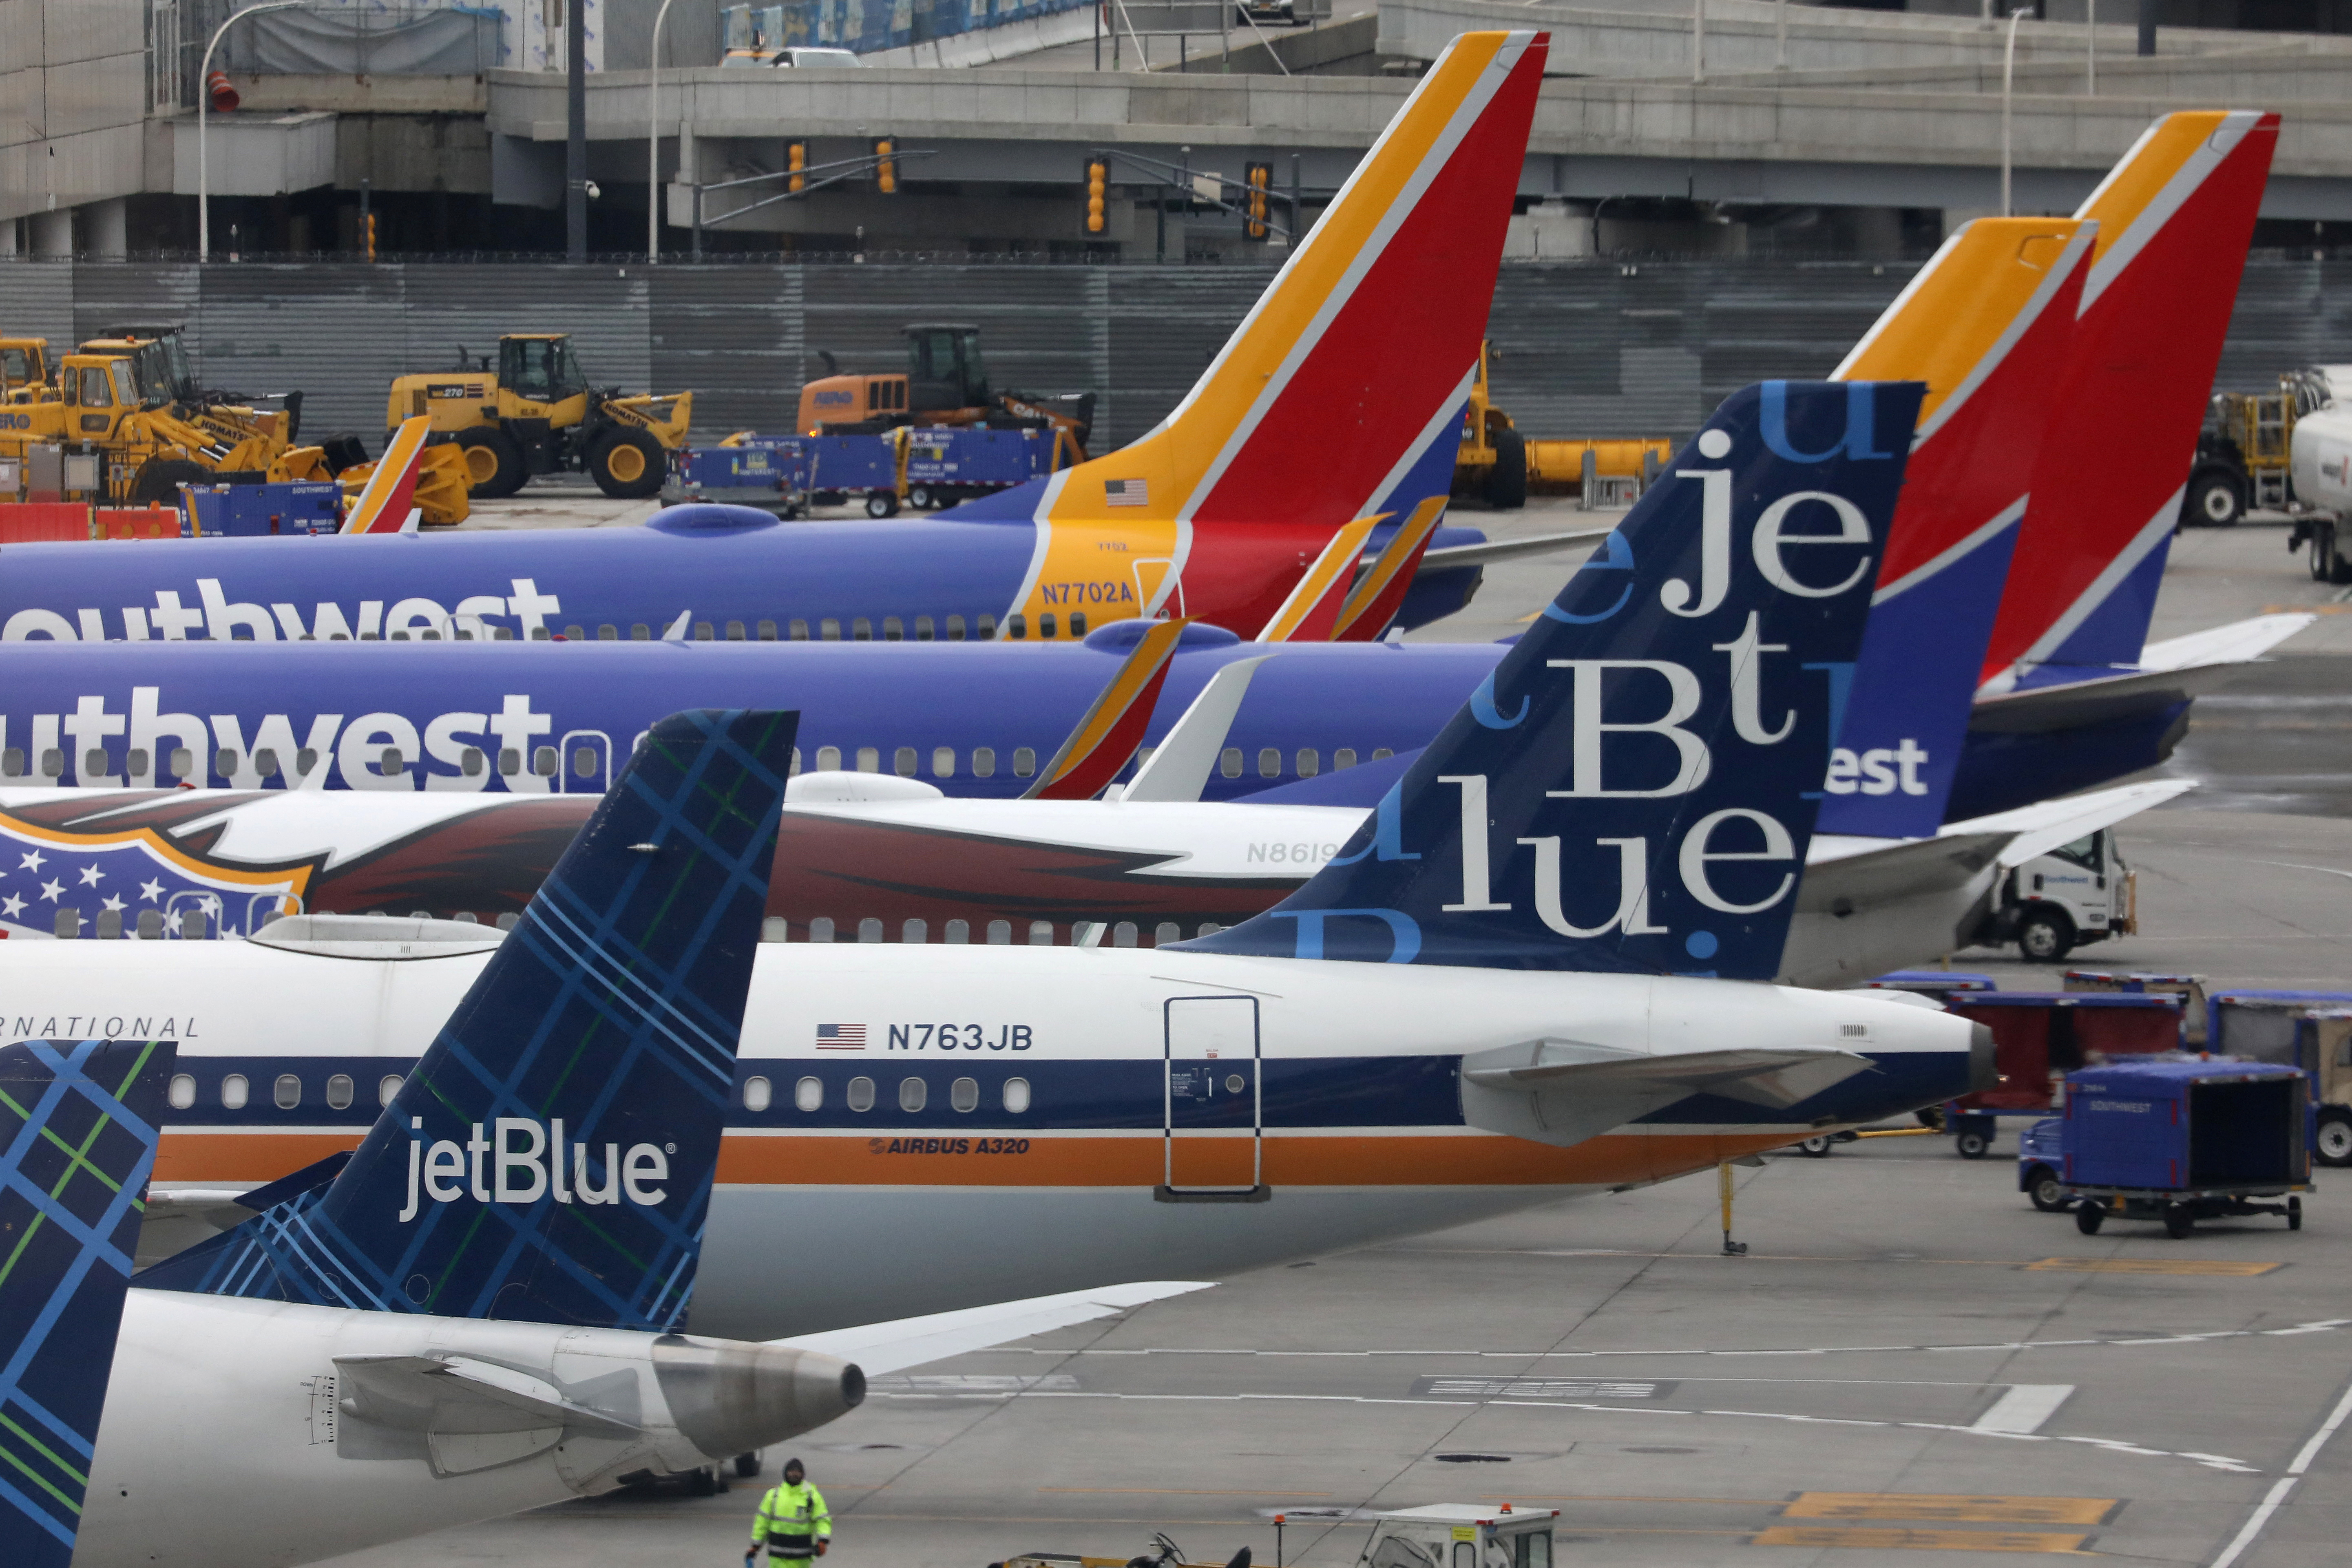 JetBlue and Southwest Airlines planes are parked at LaGuardia Airport in New York City